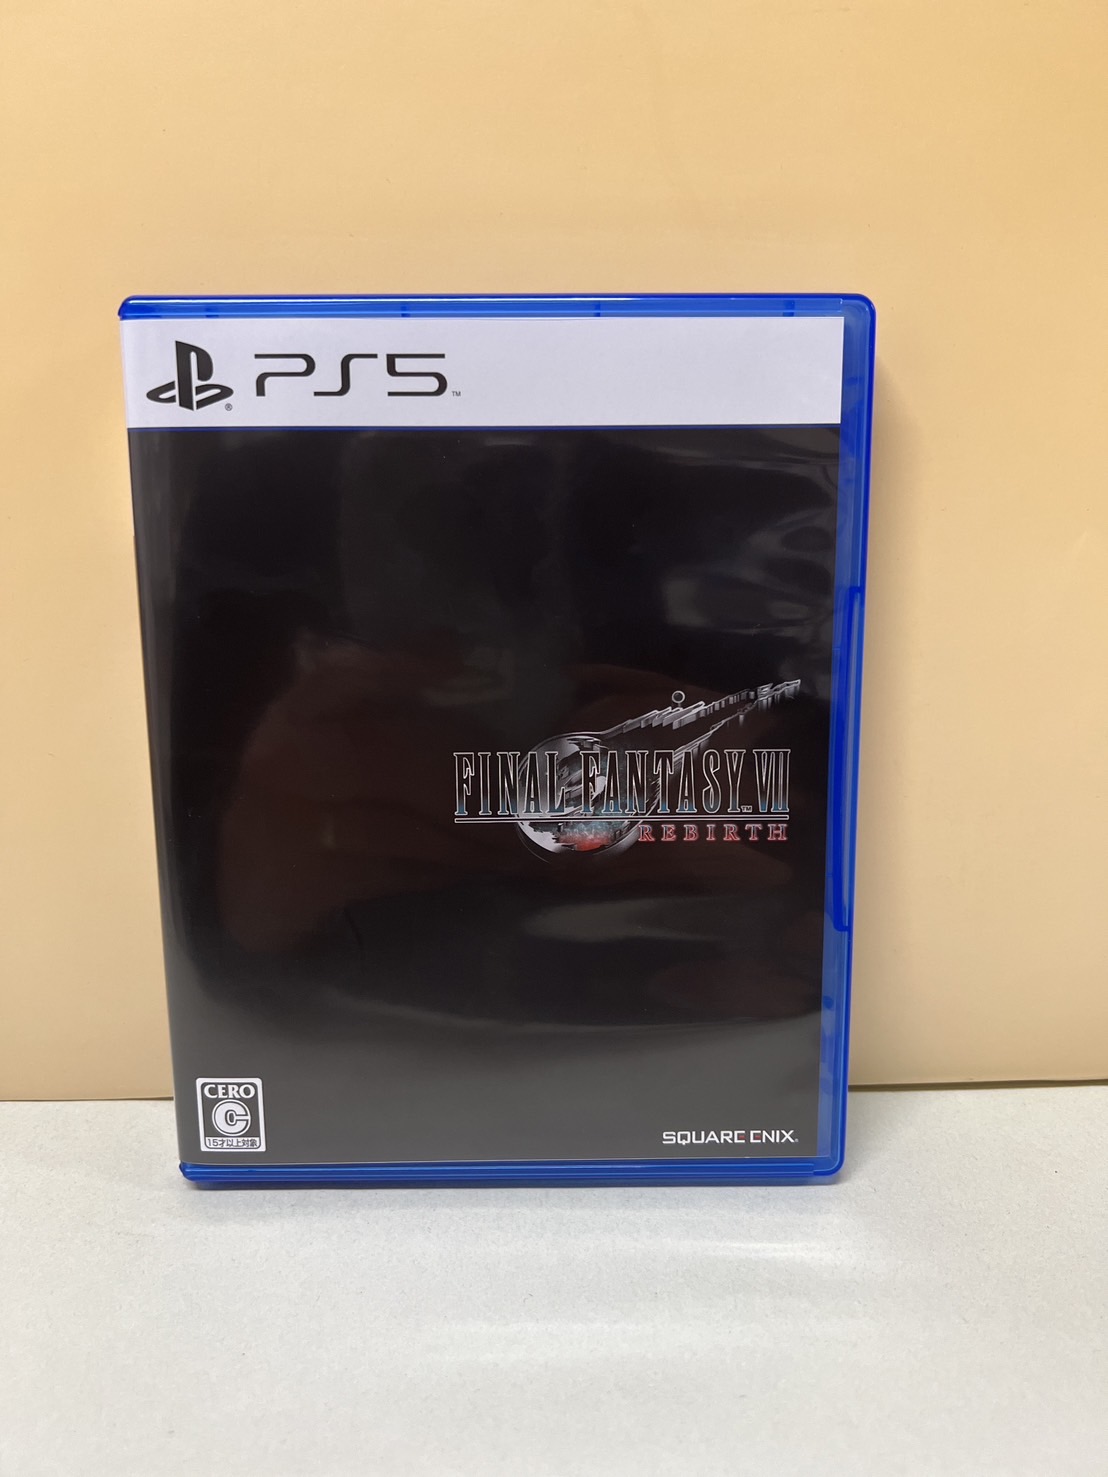 PS5ソフト ファイナルファンタジー7 リバース 中古美品 | 福岡の買取 